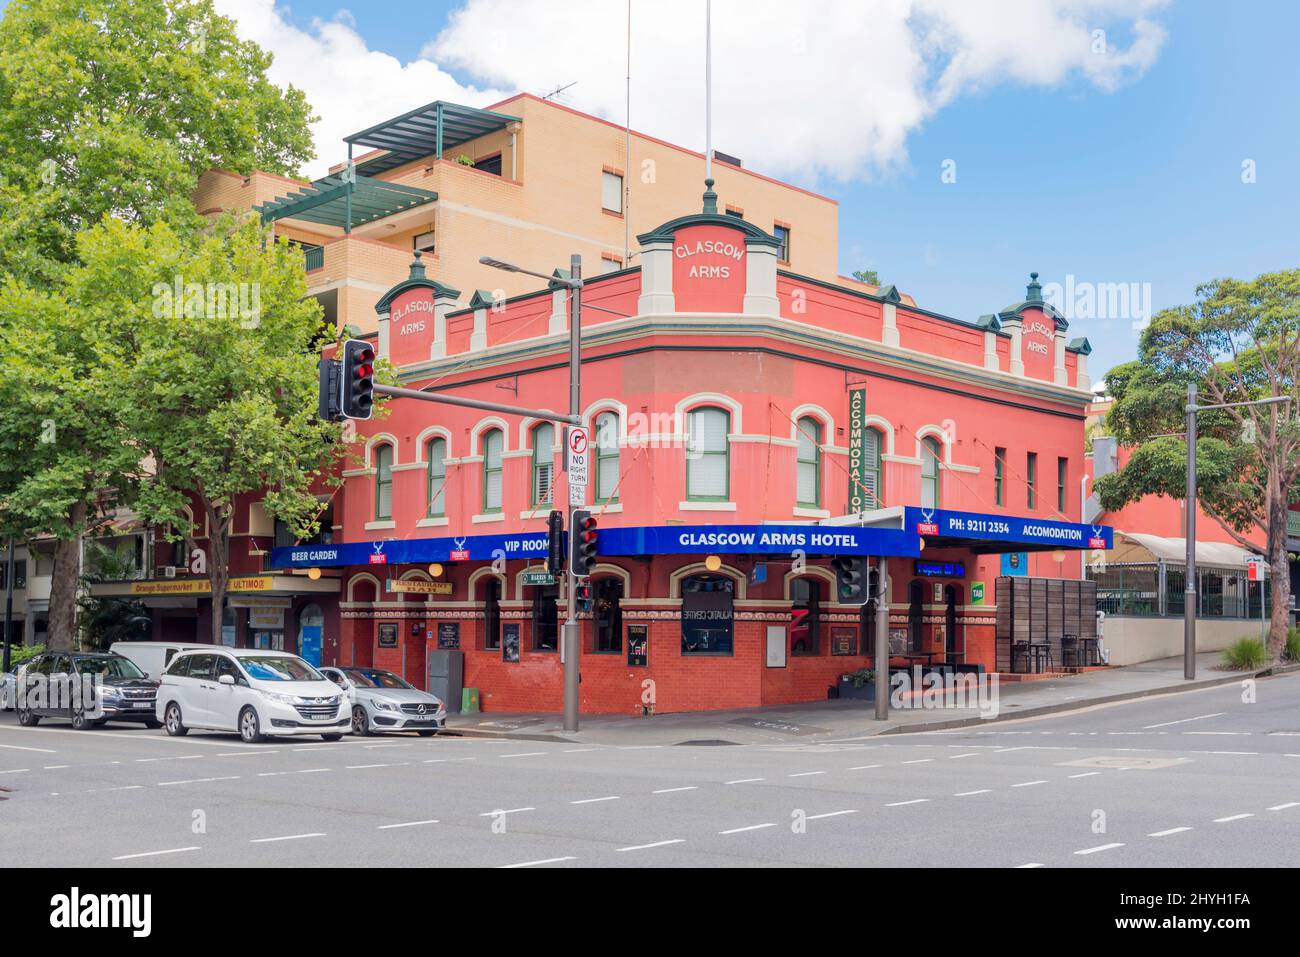 The 1875 built, Victorian era design, Glasgow Arms Hotel in Ultimo, Sydney, Australia is a two storey city pub hotel with an ornate parapet above it Stock Photo